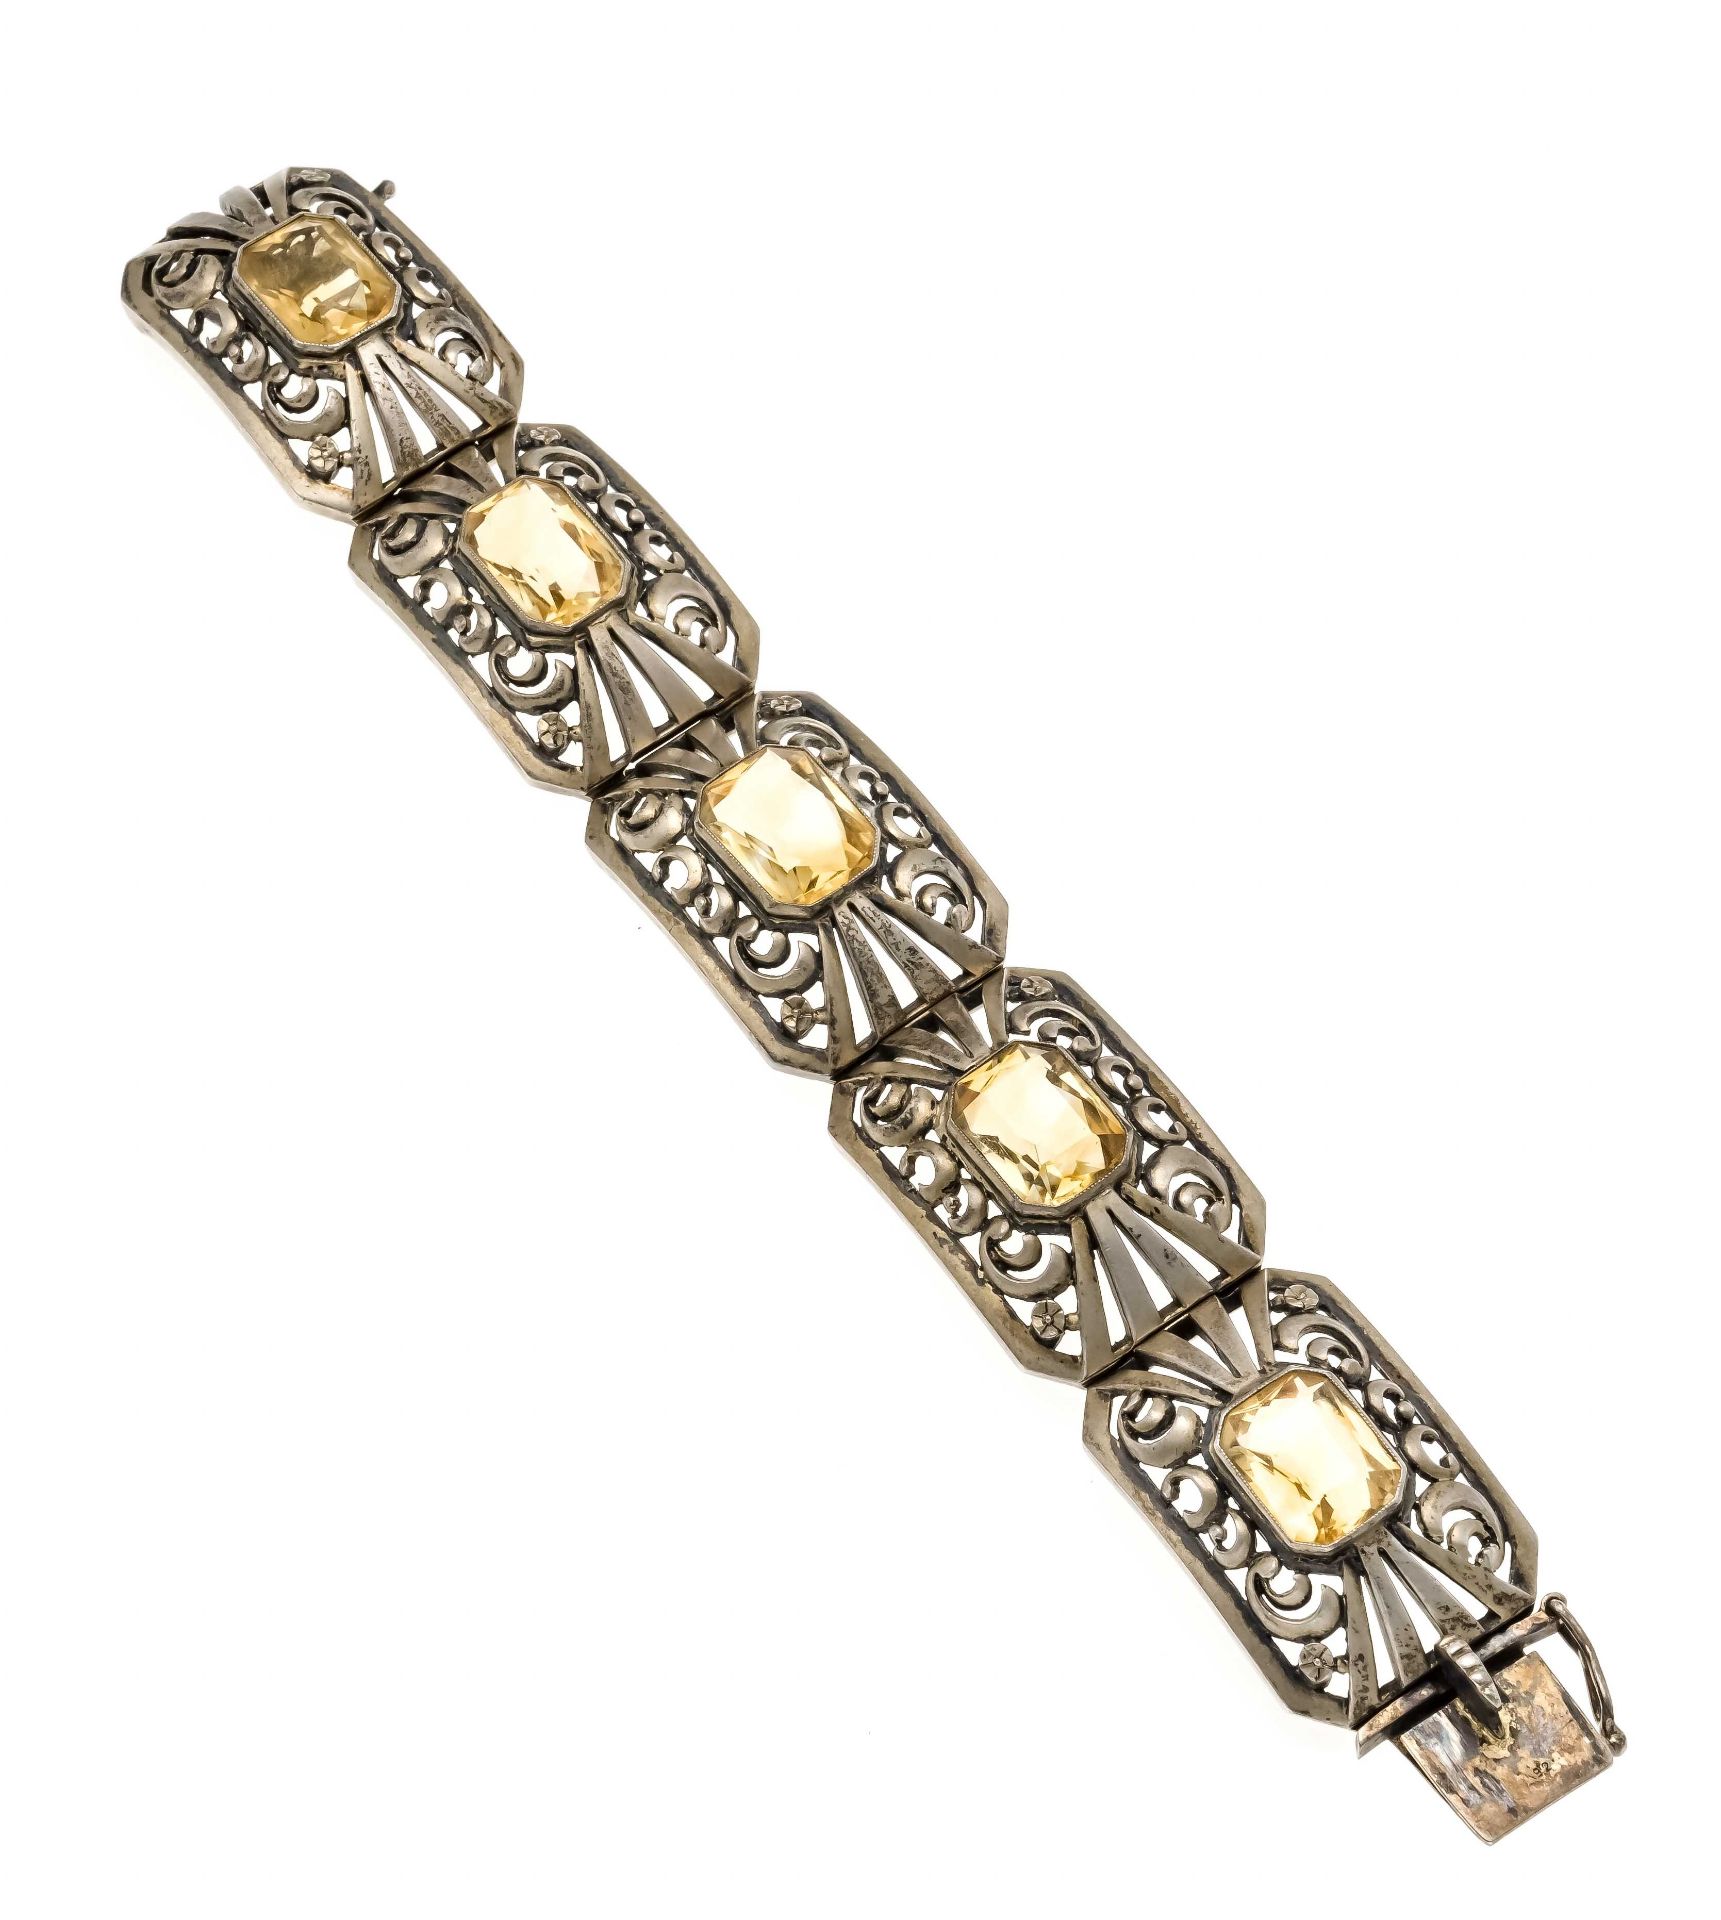 Citrine link bracelet silver 925/000 with 5 scissor-cut faceted citrines 15 x 11 mm, w. 27 mm, box - Image 2 of 2